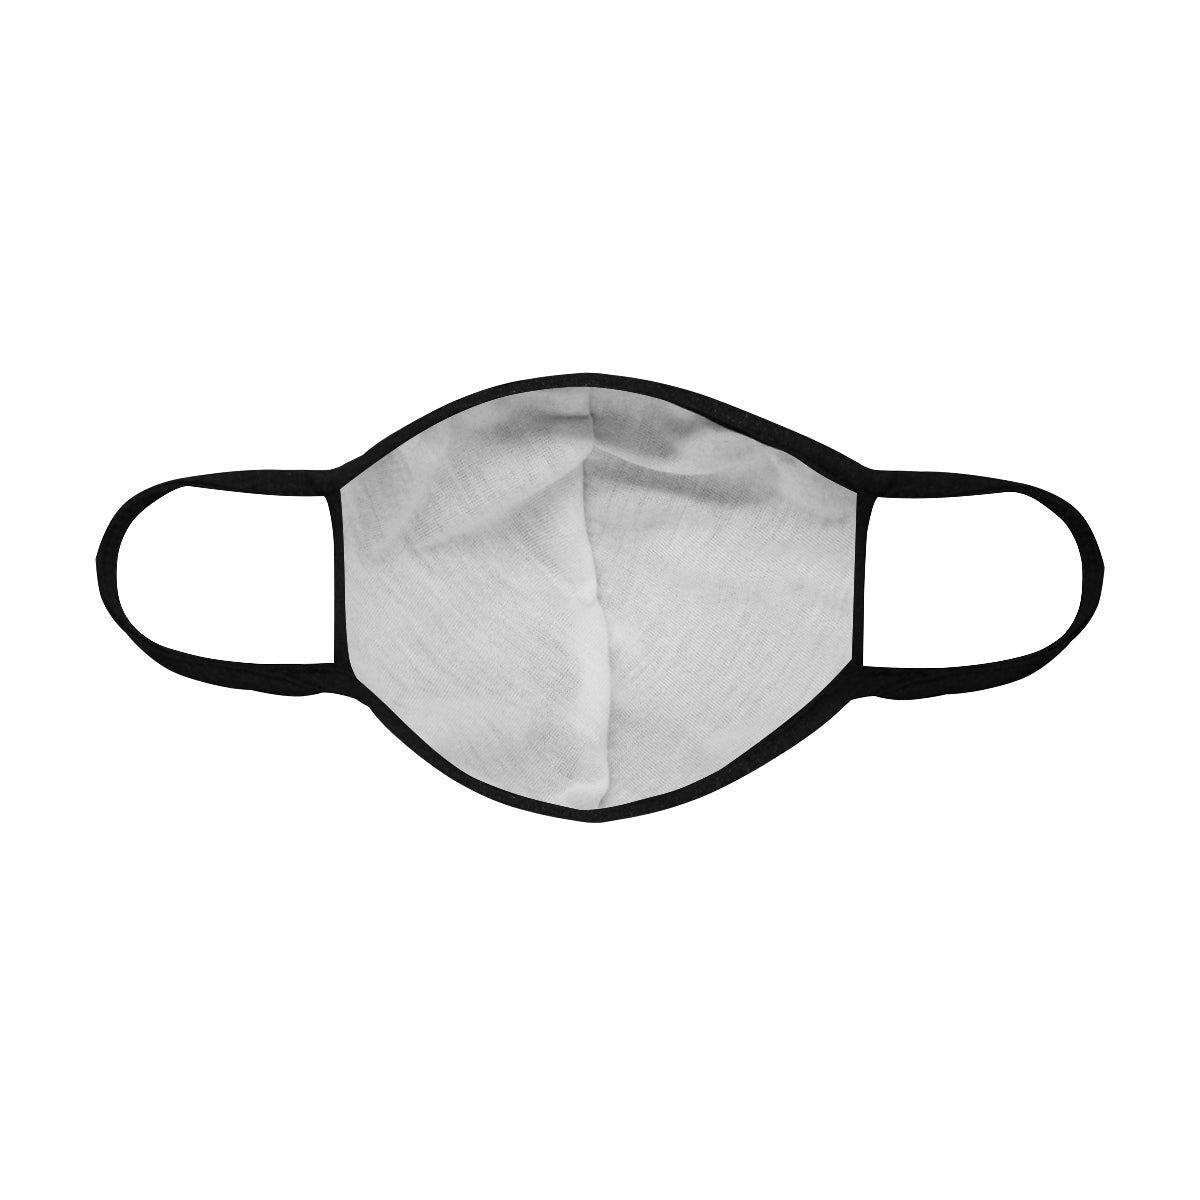 AfriBix Collage Cotton Fabric Face Mask with filter slot (30 filters Included) - Non-medical use